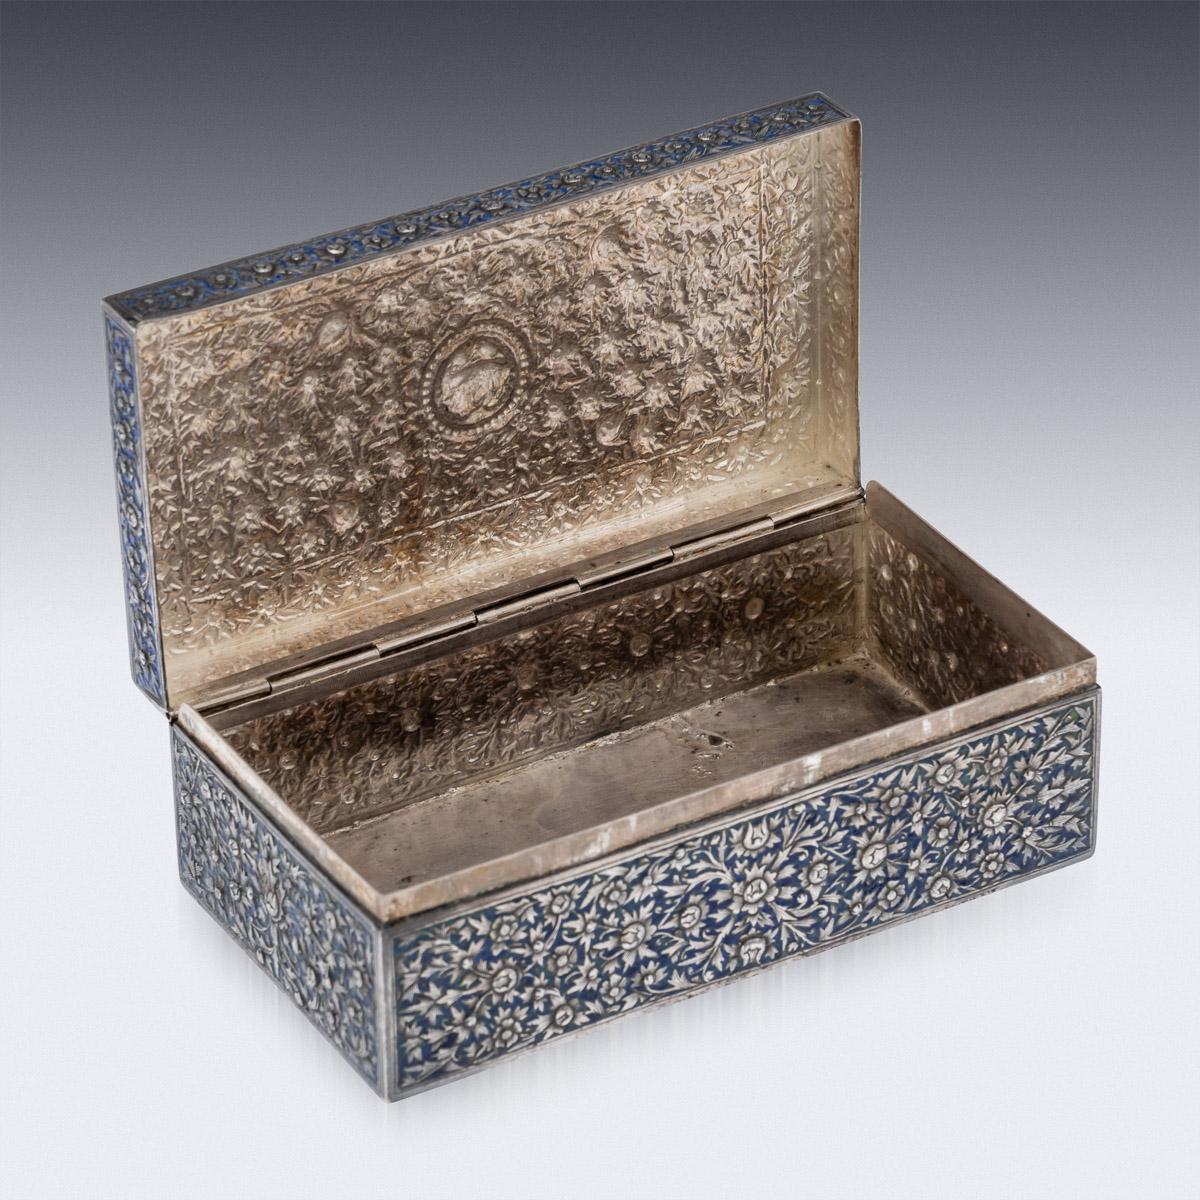 Late 19th Century 19th Century Thai Solid Silver & Enamel Box, Xiang He, Bangkok, c.1880 For Sale